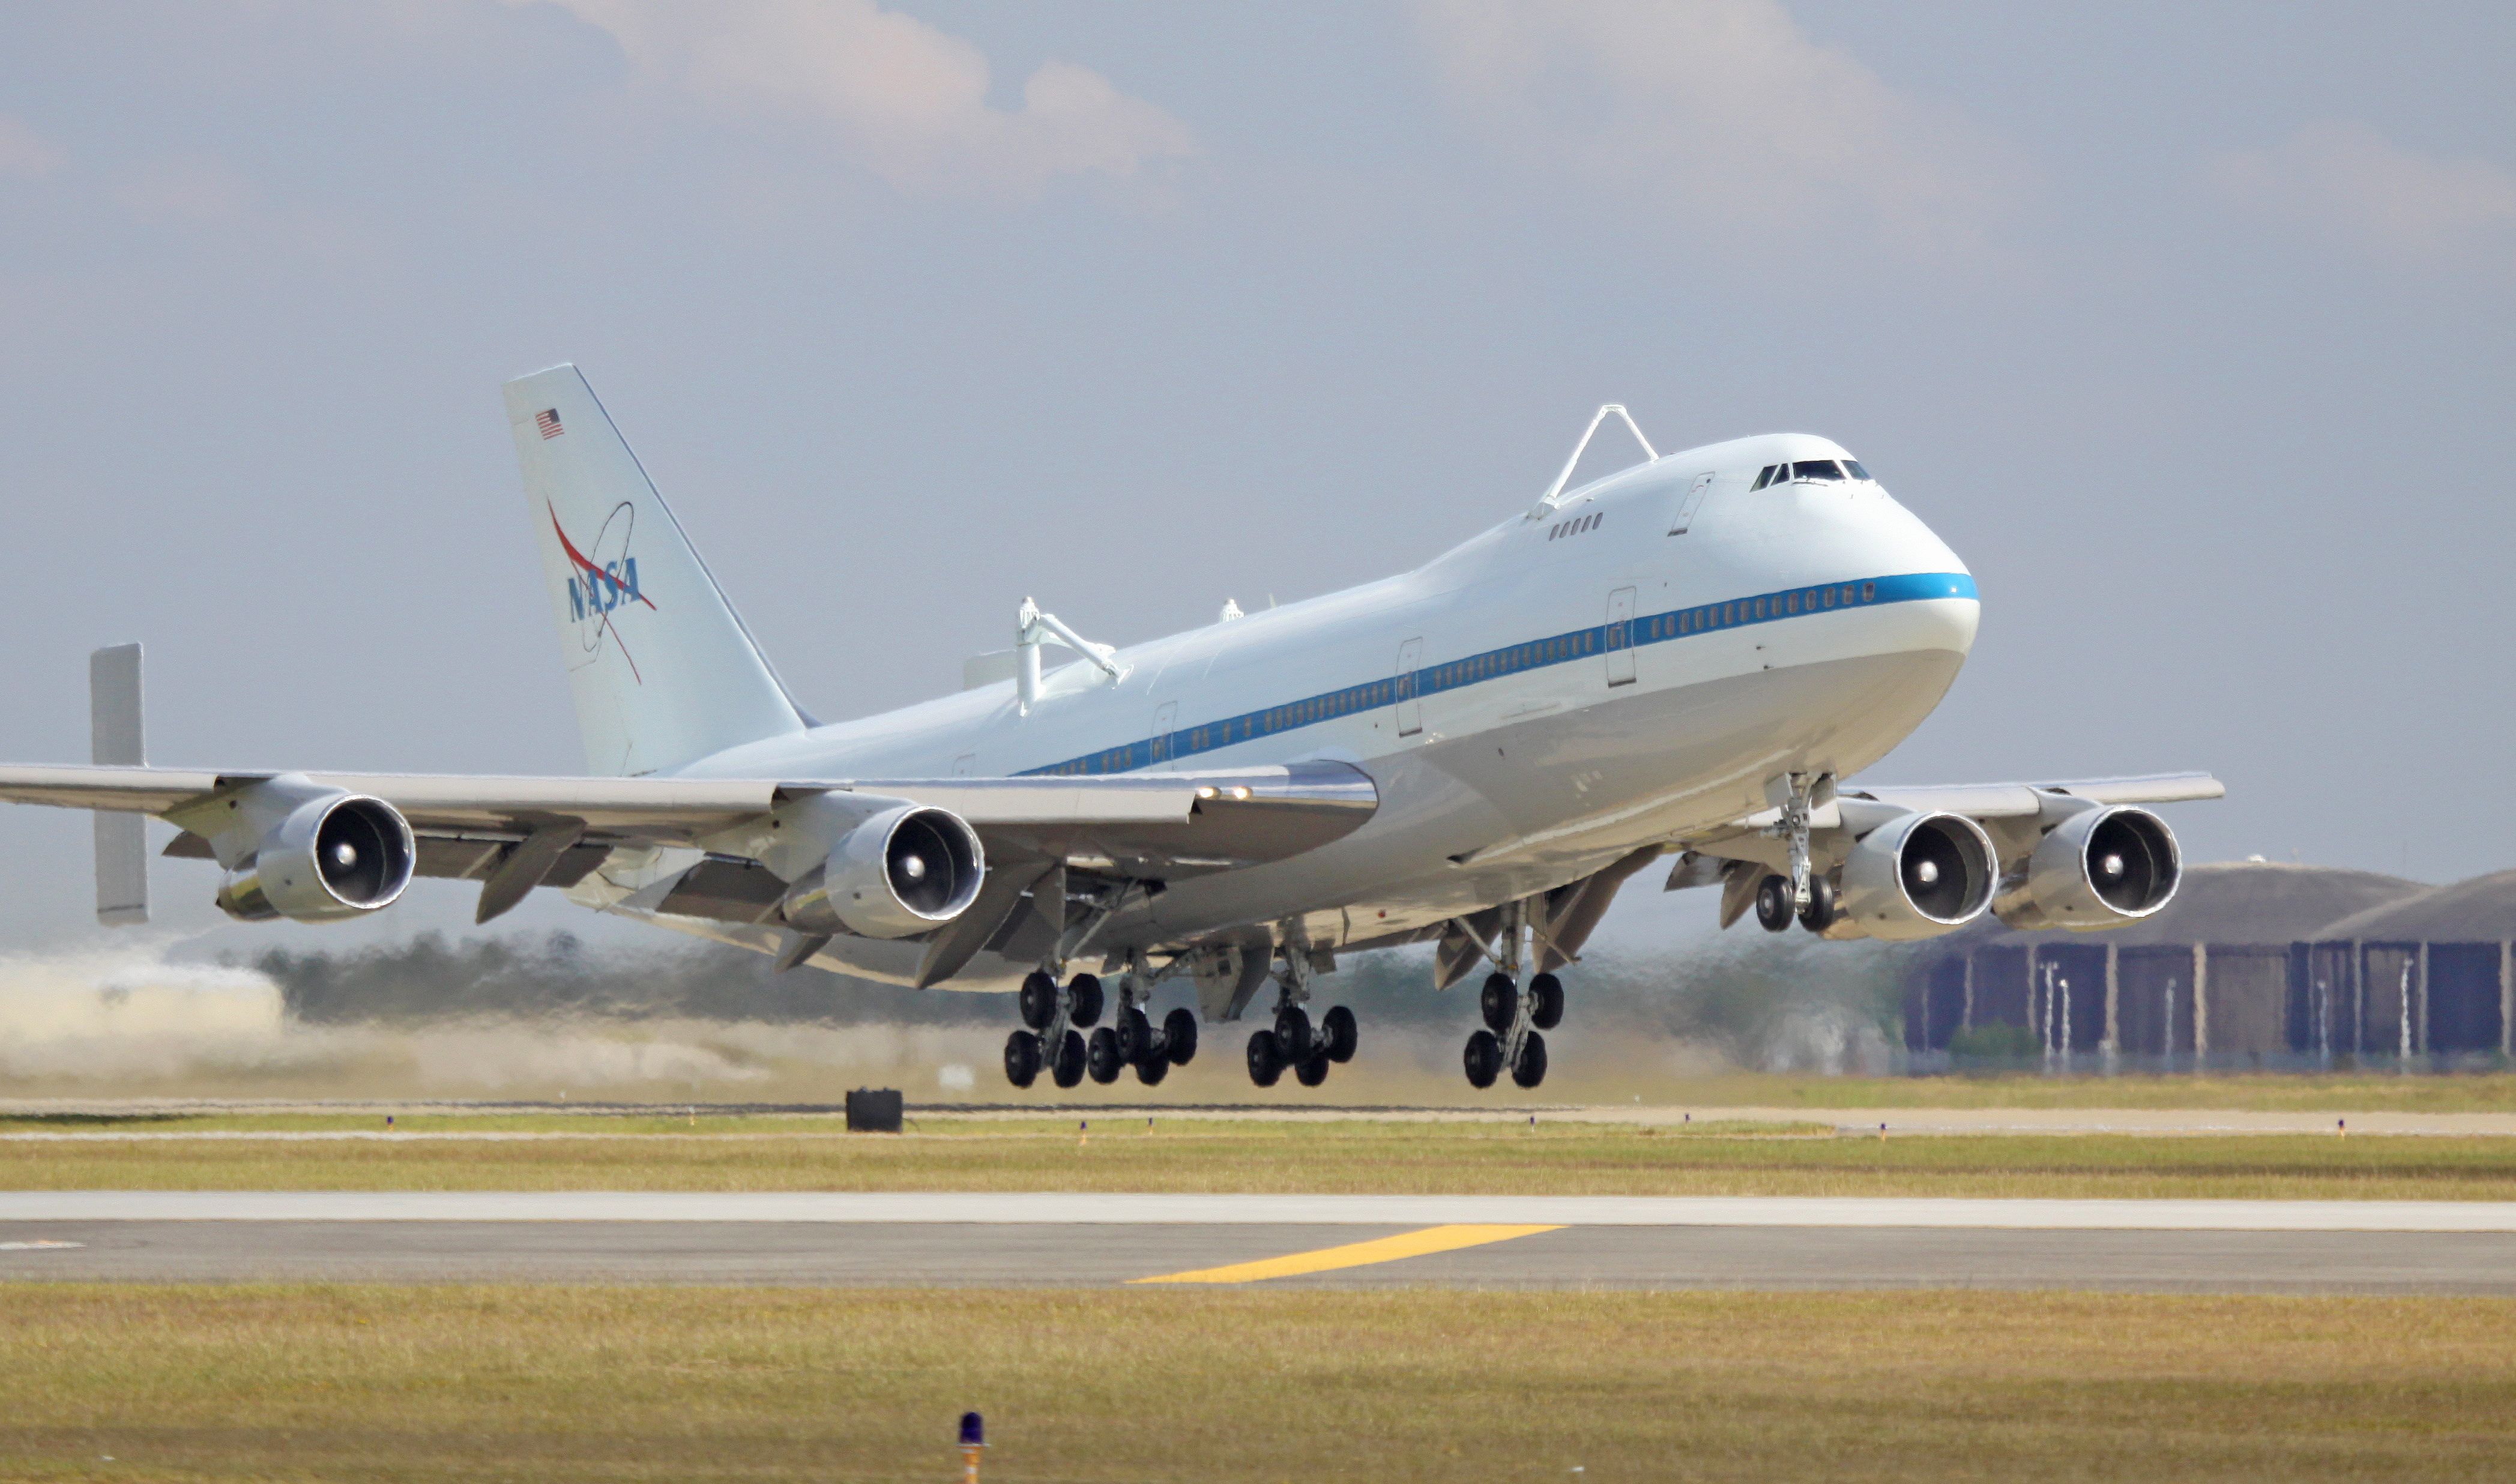 NASA's Shuttle Carrier Aircraft, registered as N911NA